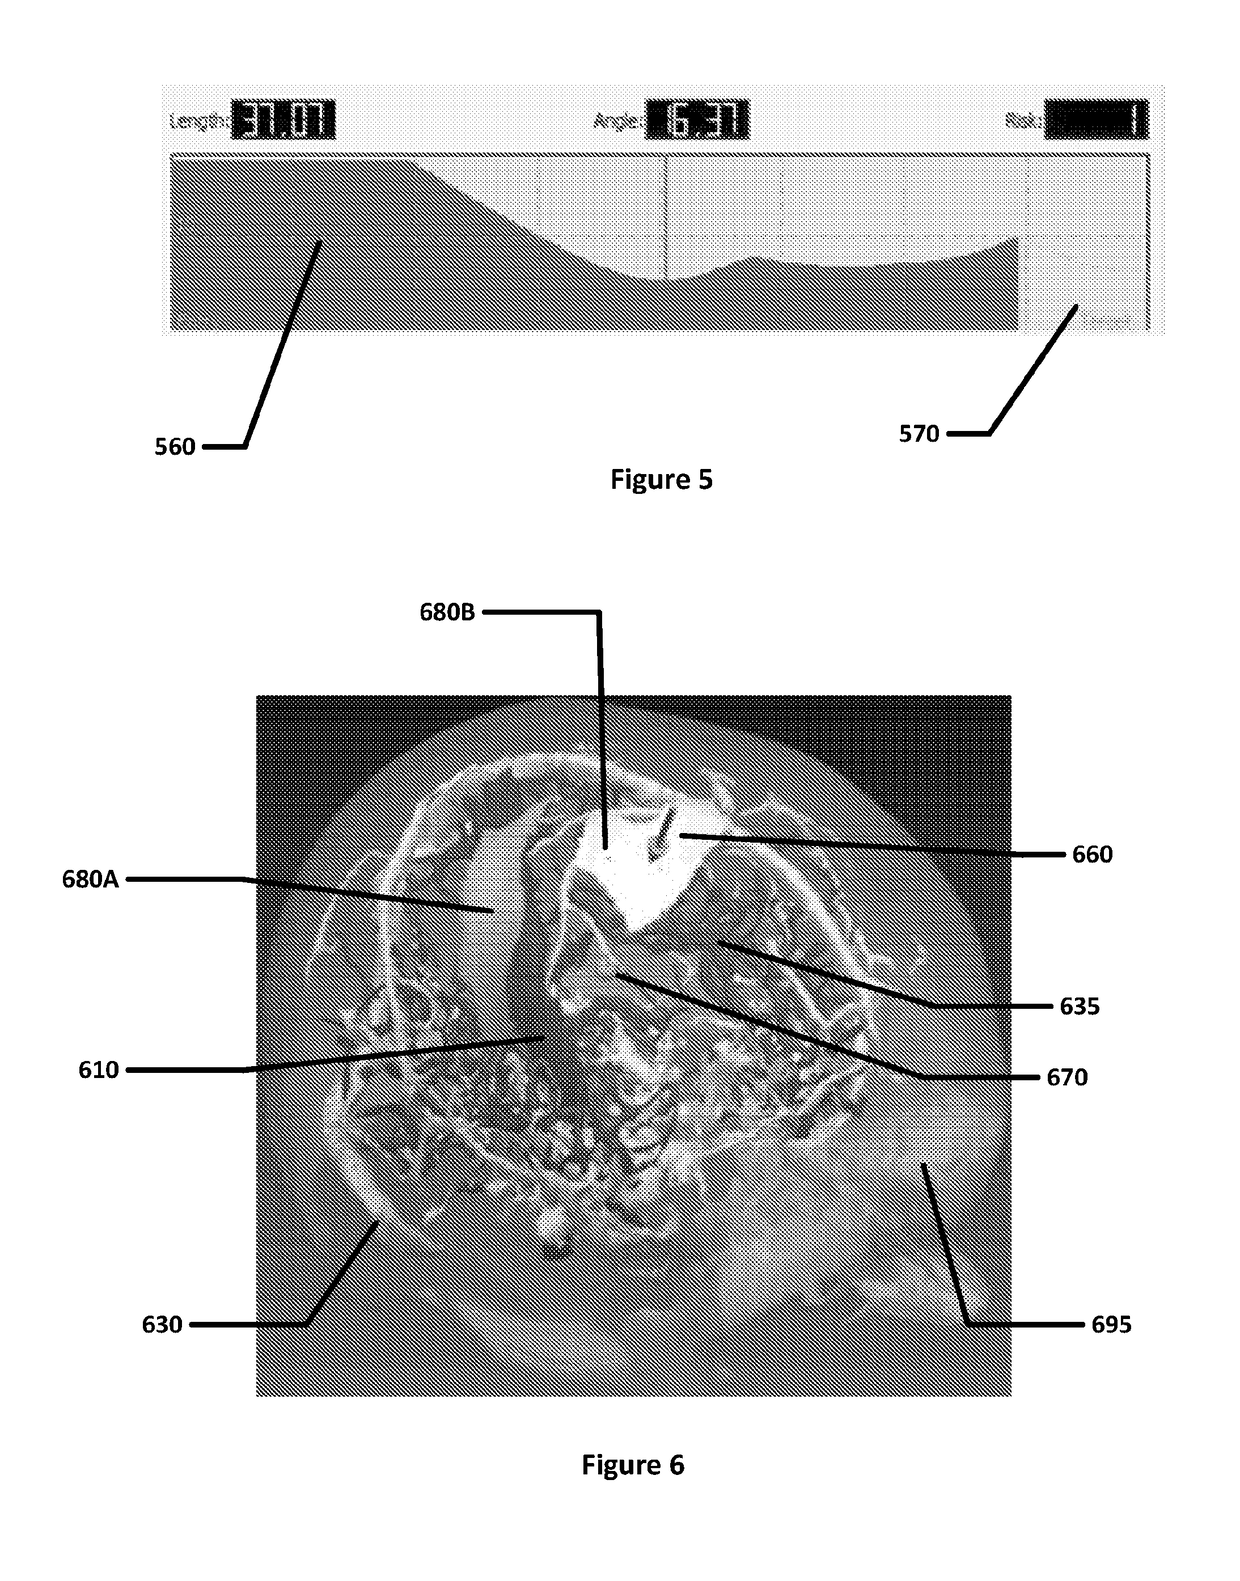 System and method for computer-assisted planning of a trajectory for a surgical insertion into a skull